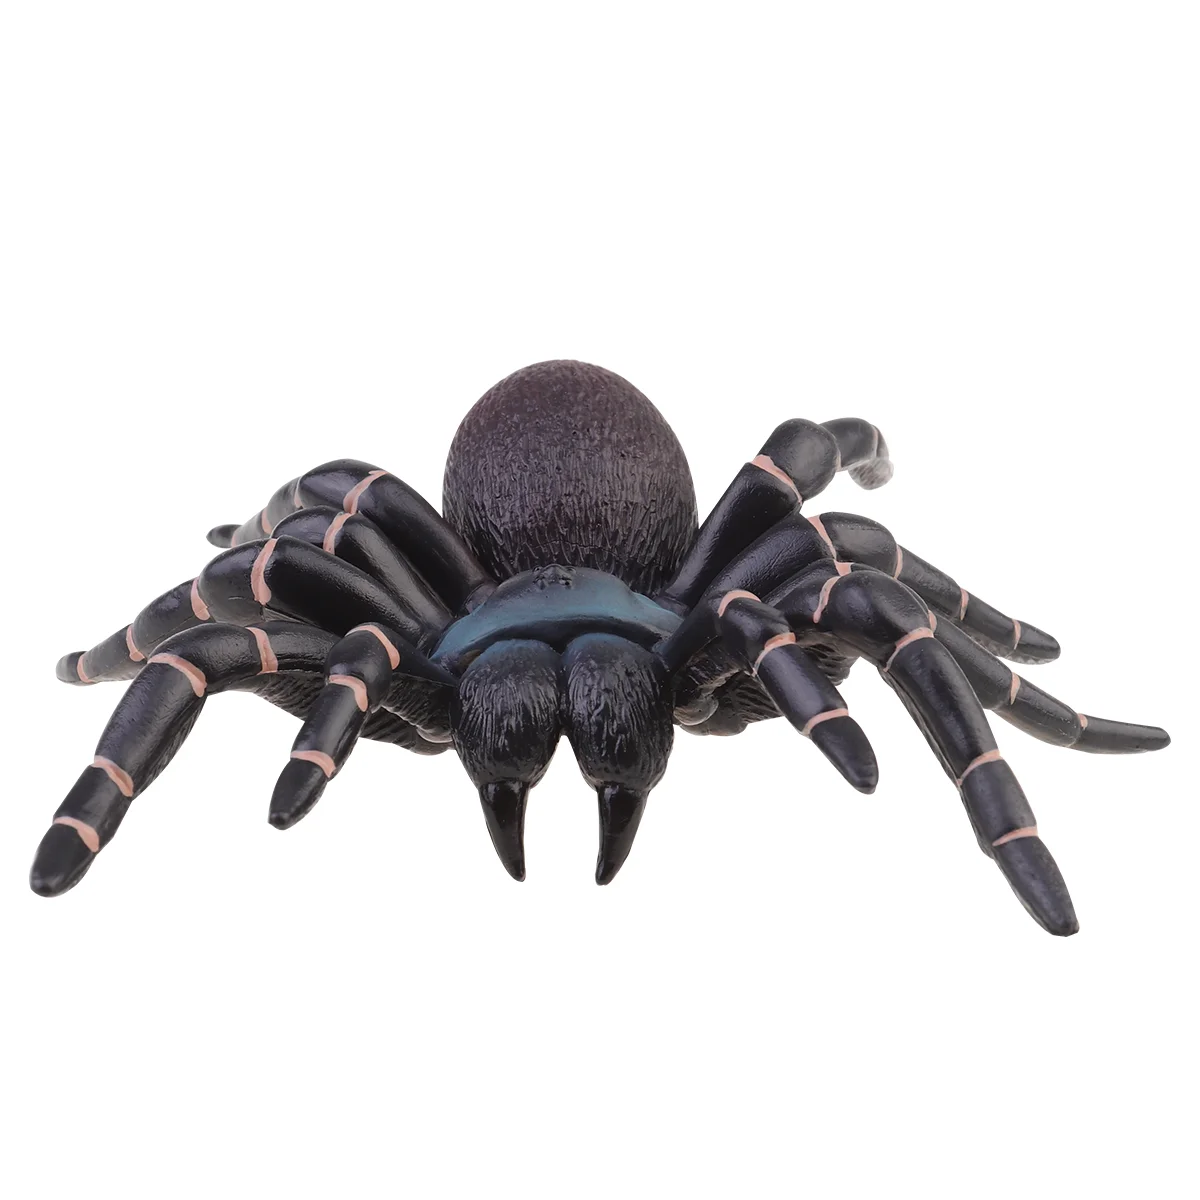 

Spider Toy Halloween Spiders Model Realistic Toys Prank Props Decorations Fake Scary Pranks Artificialkids Reptile Giant Insect